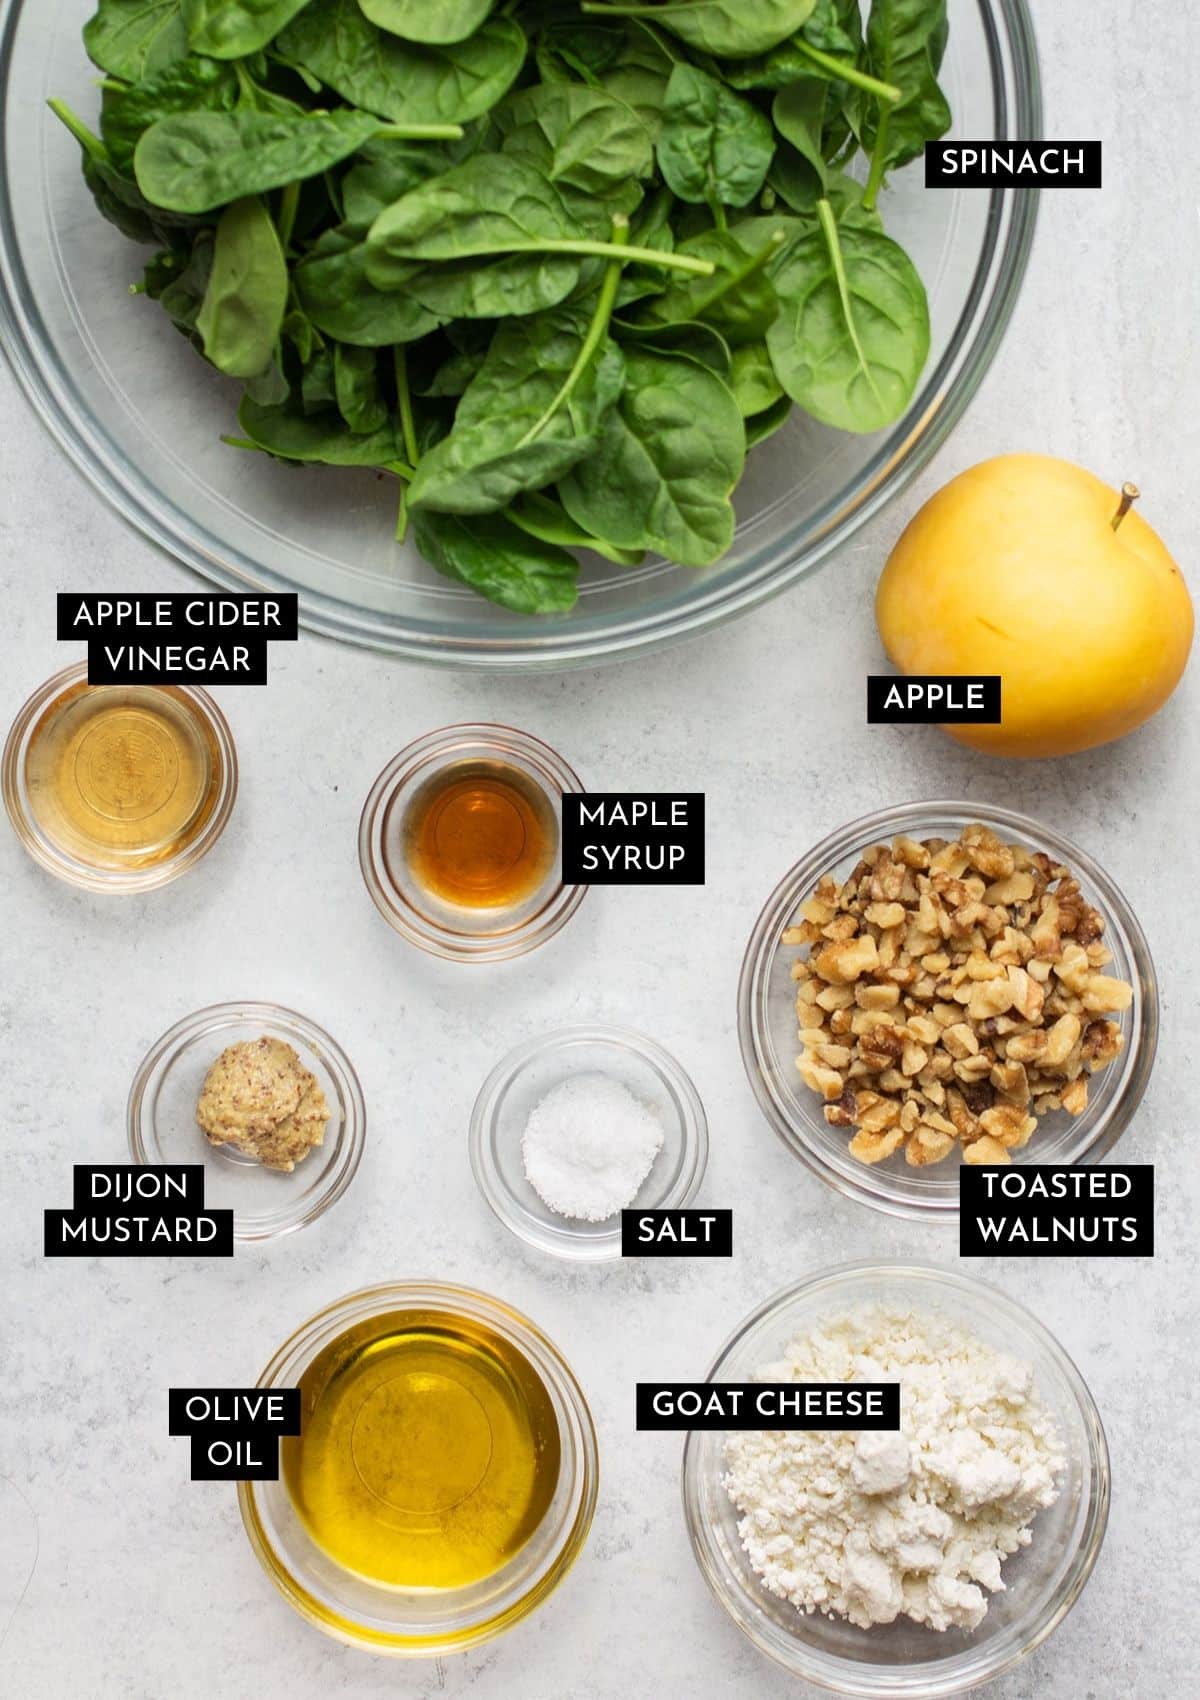 Salad ingredients, measured out into individual glass bowls.